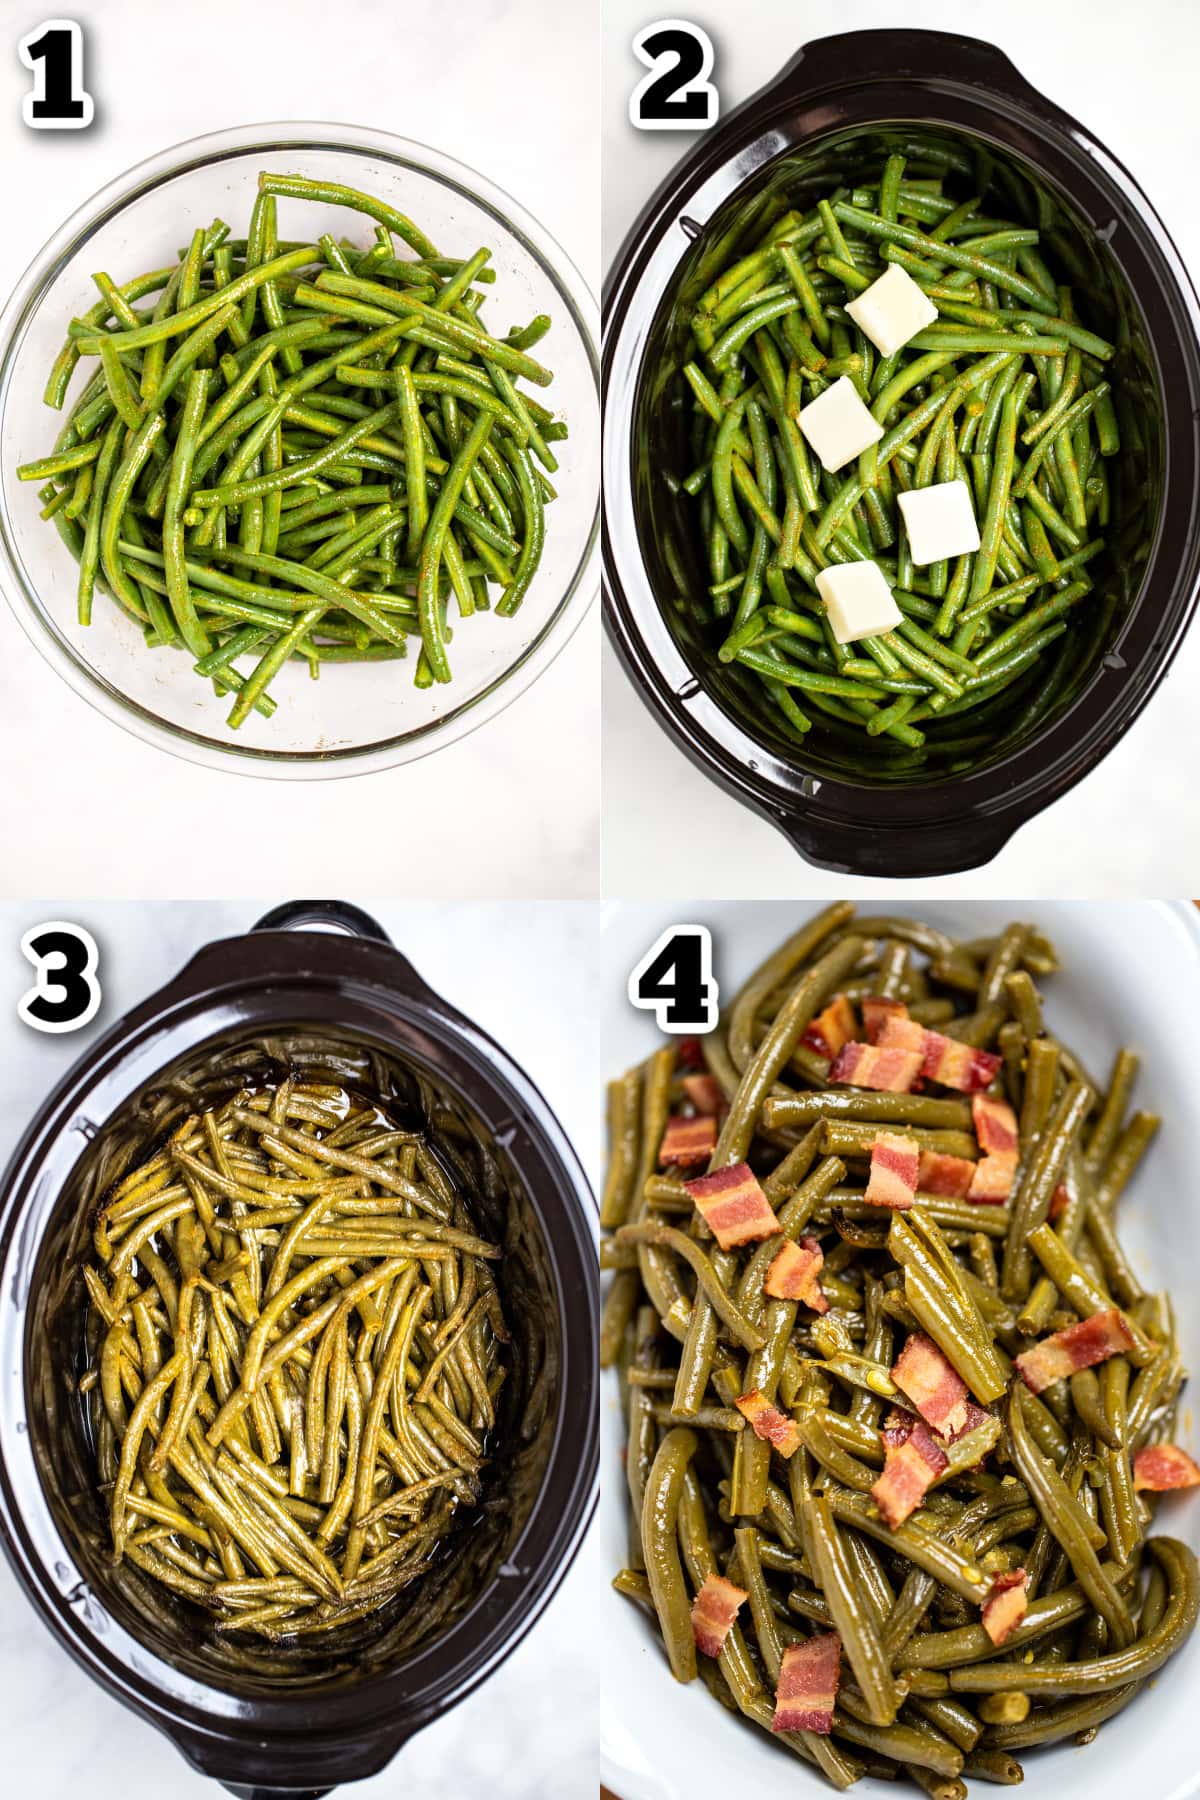 Step by step photos for how to make crockpot green beans.